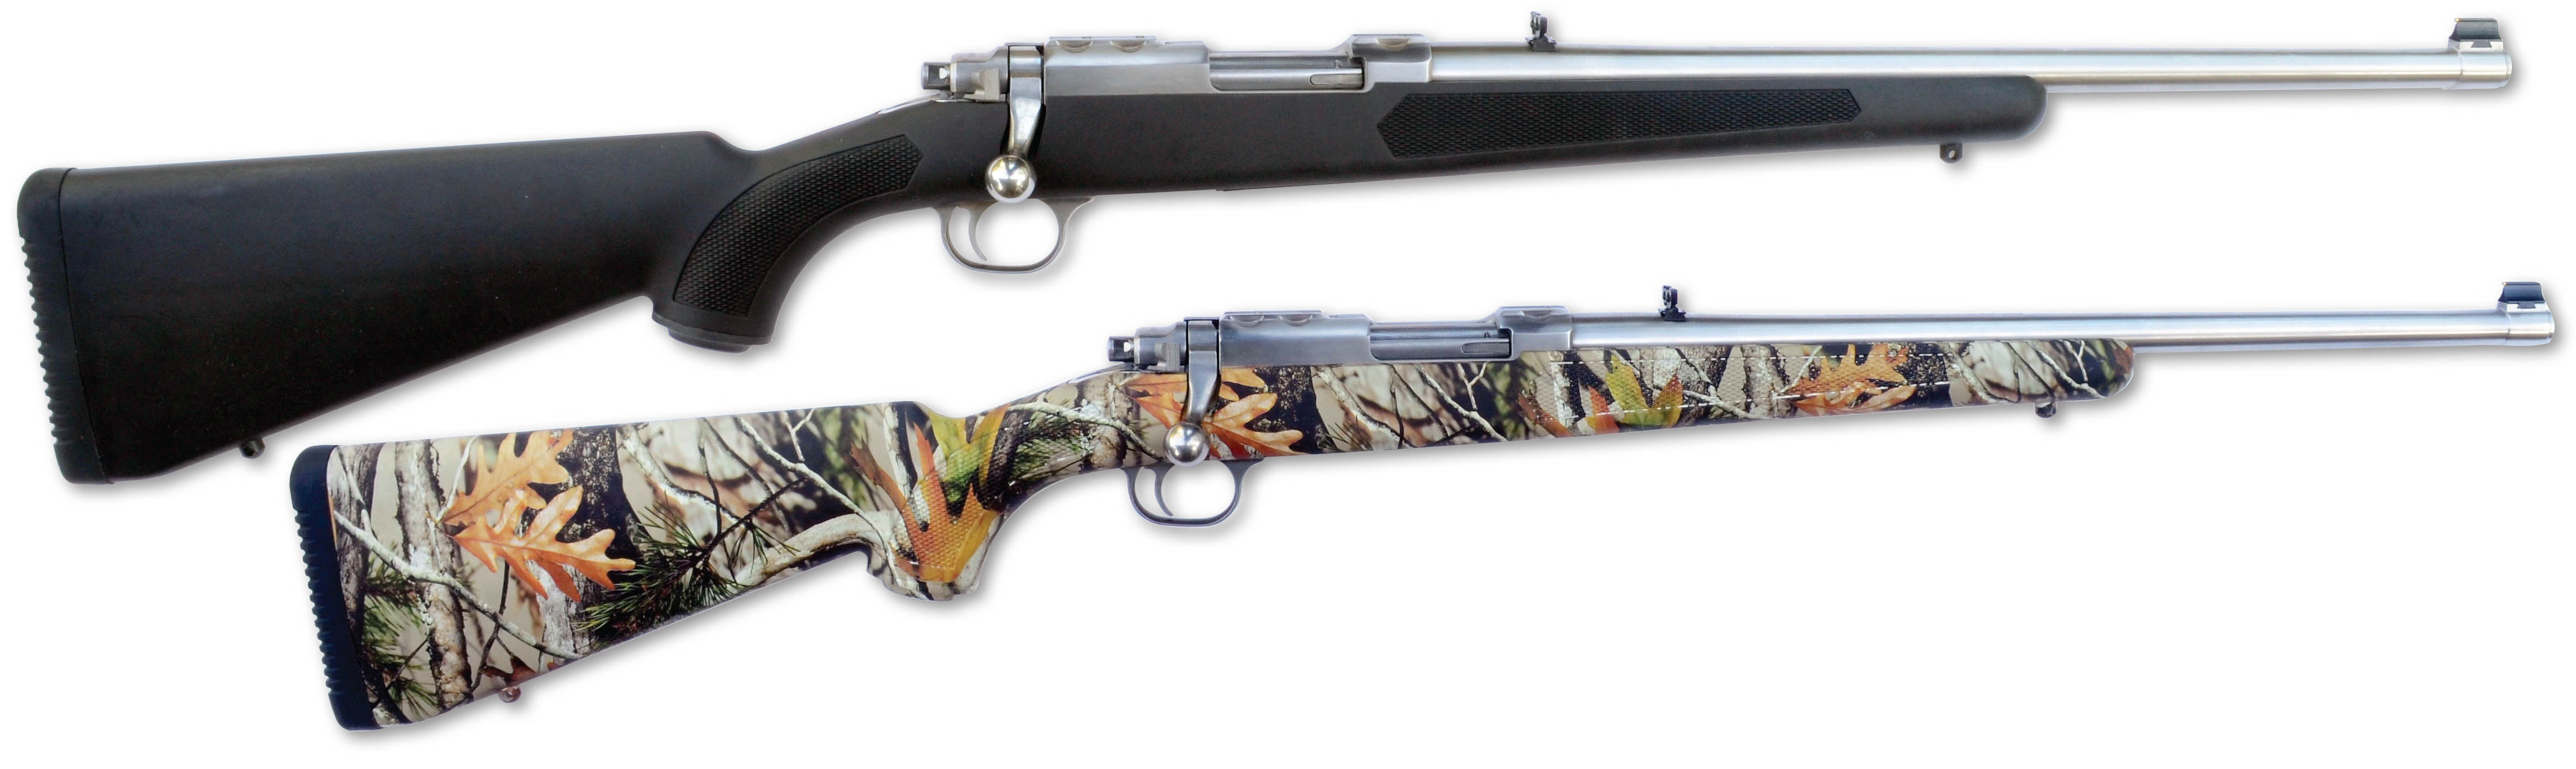 Shown is Ruger 77/357 .357 Magnum (above) and a Model 77/44 .44 Remington Magnum with camouflage stock. Variants of these have been recently brought back into production.